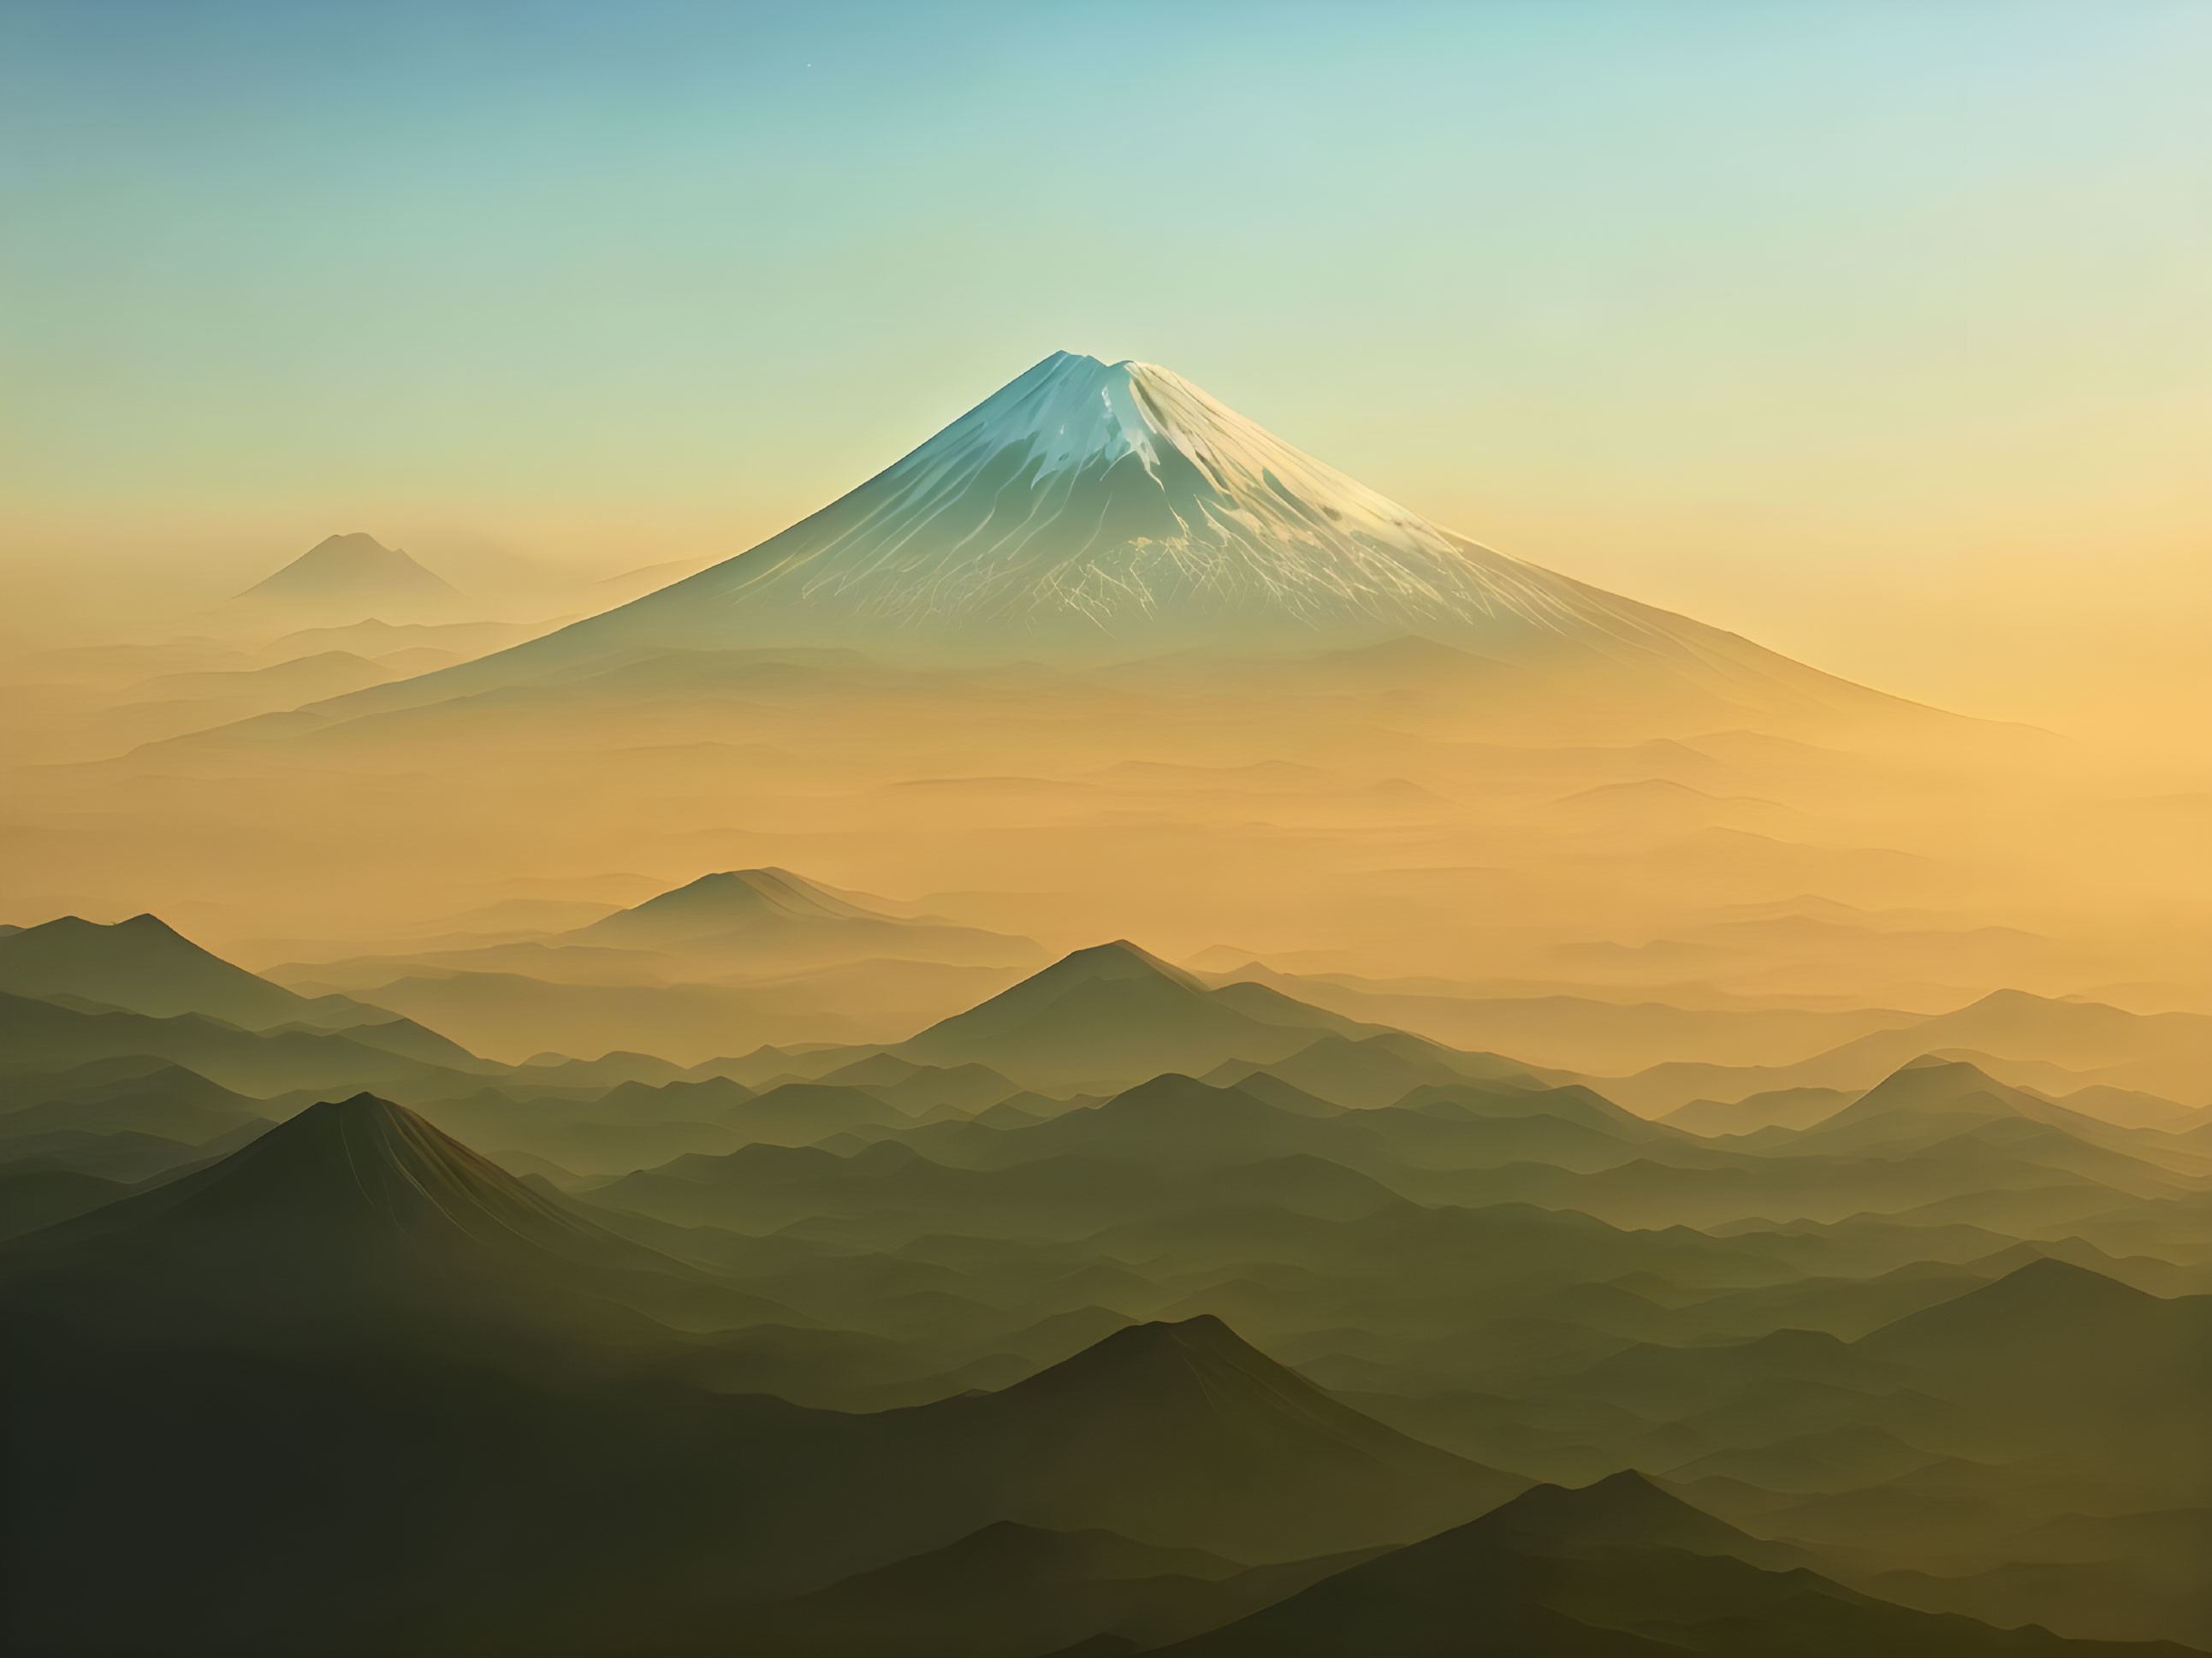 Snow-capped volcanic mountain in misty landscape under golden sky